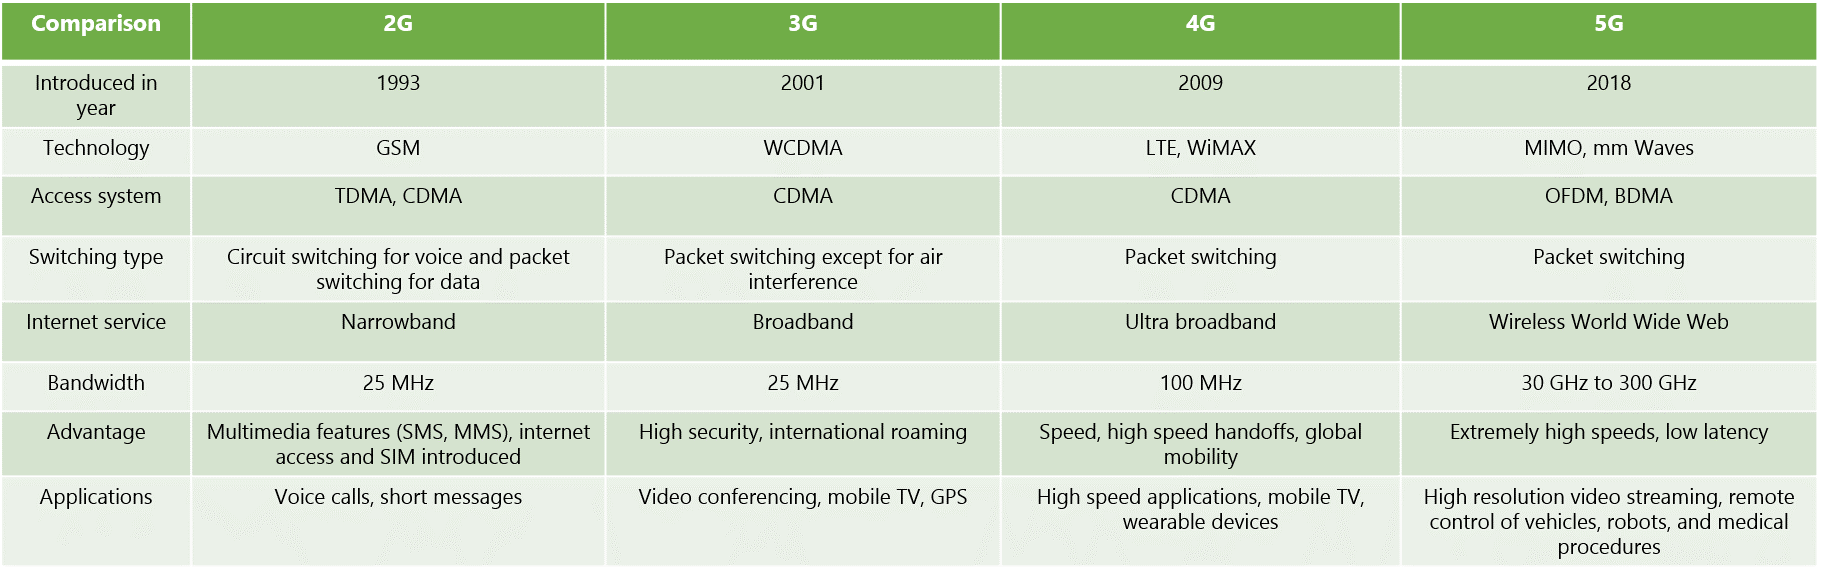 Difference between 3G, 4G and 5G networks